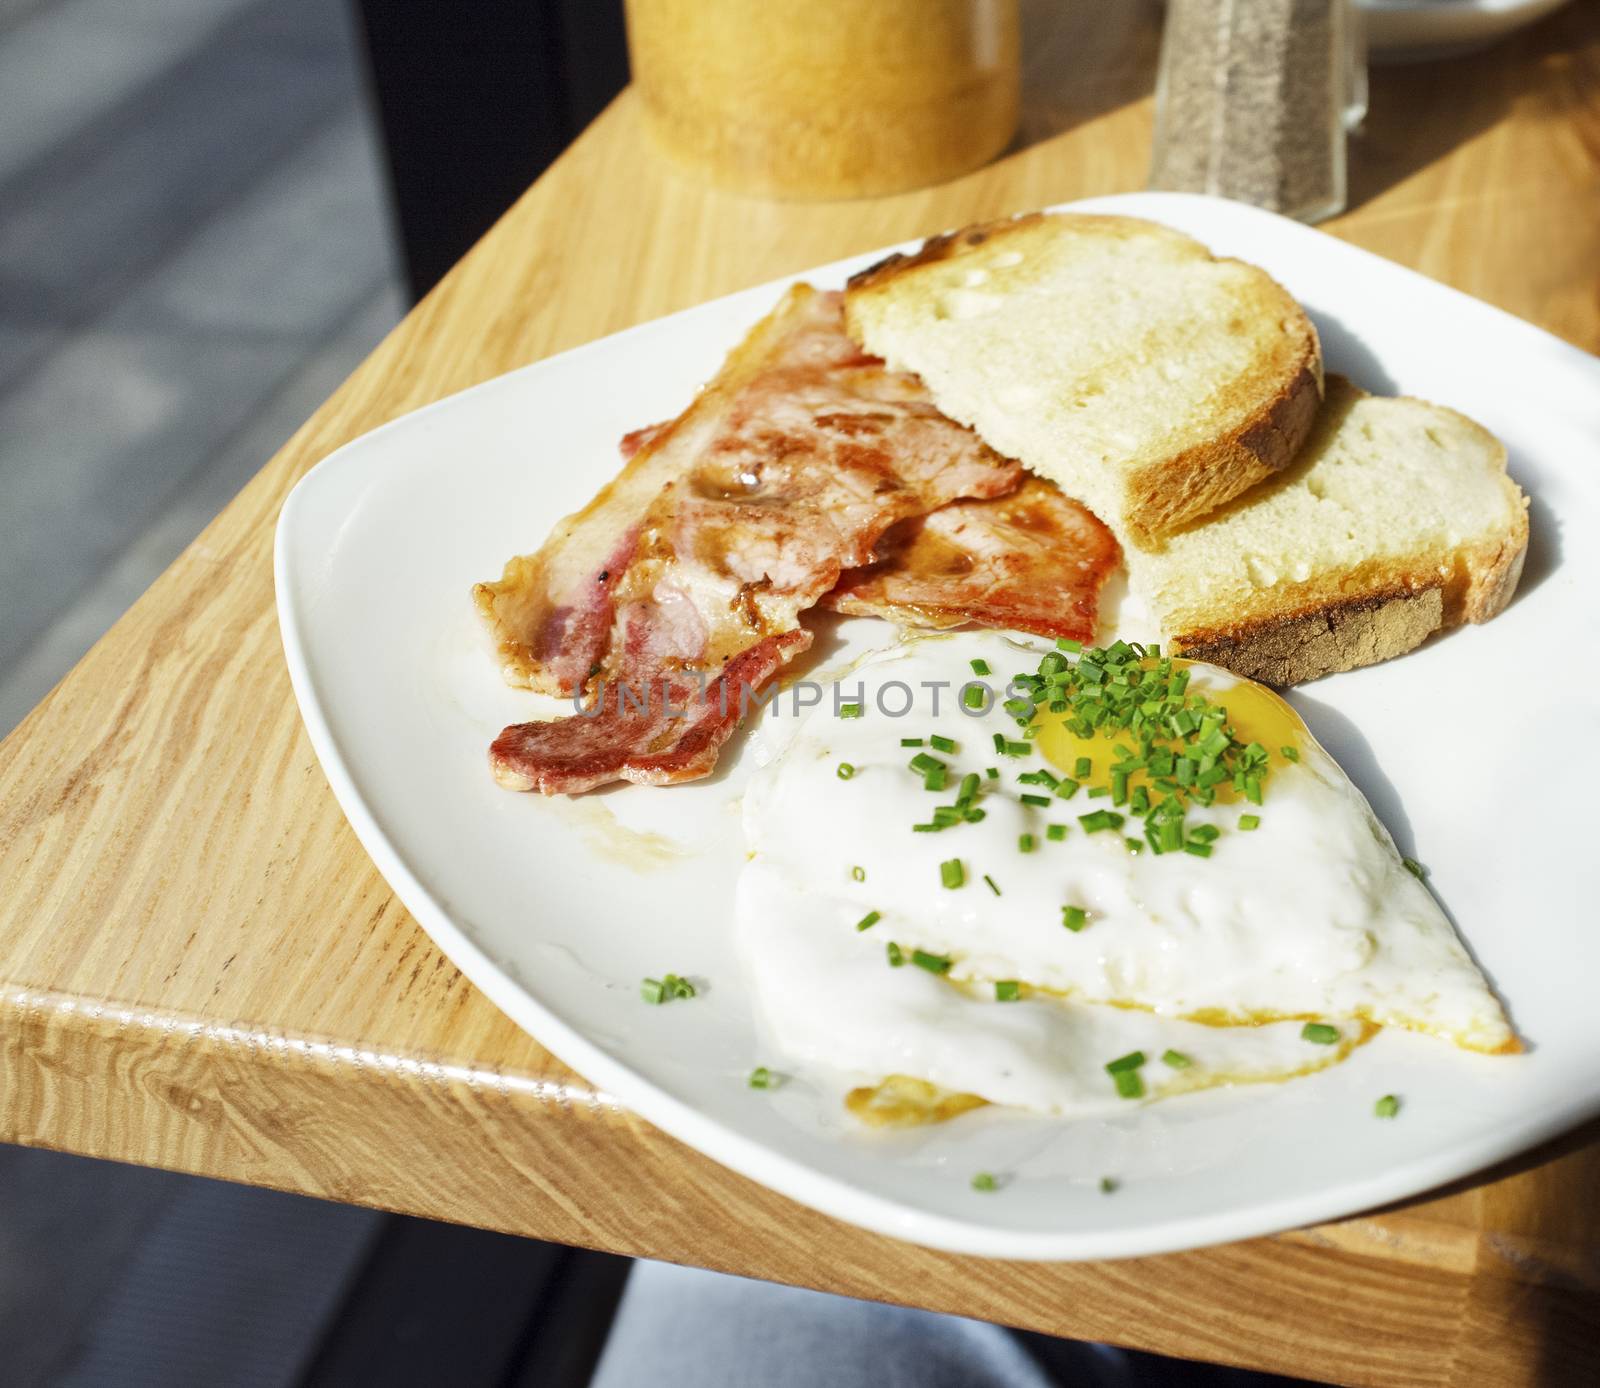 English breakfast consisting of bacon, toast and eggs served on a café in London.